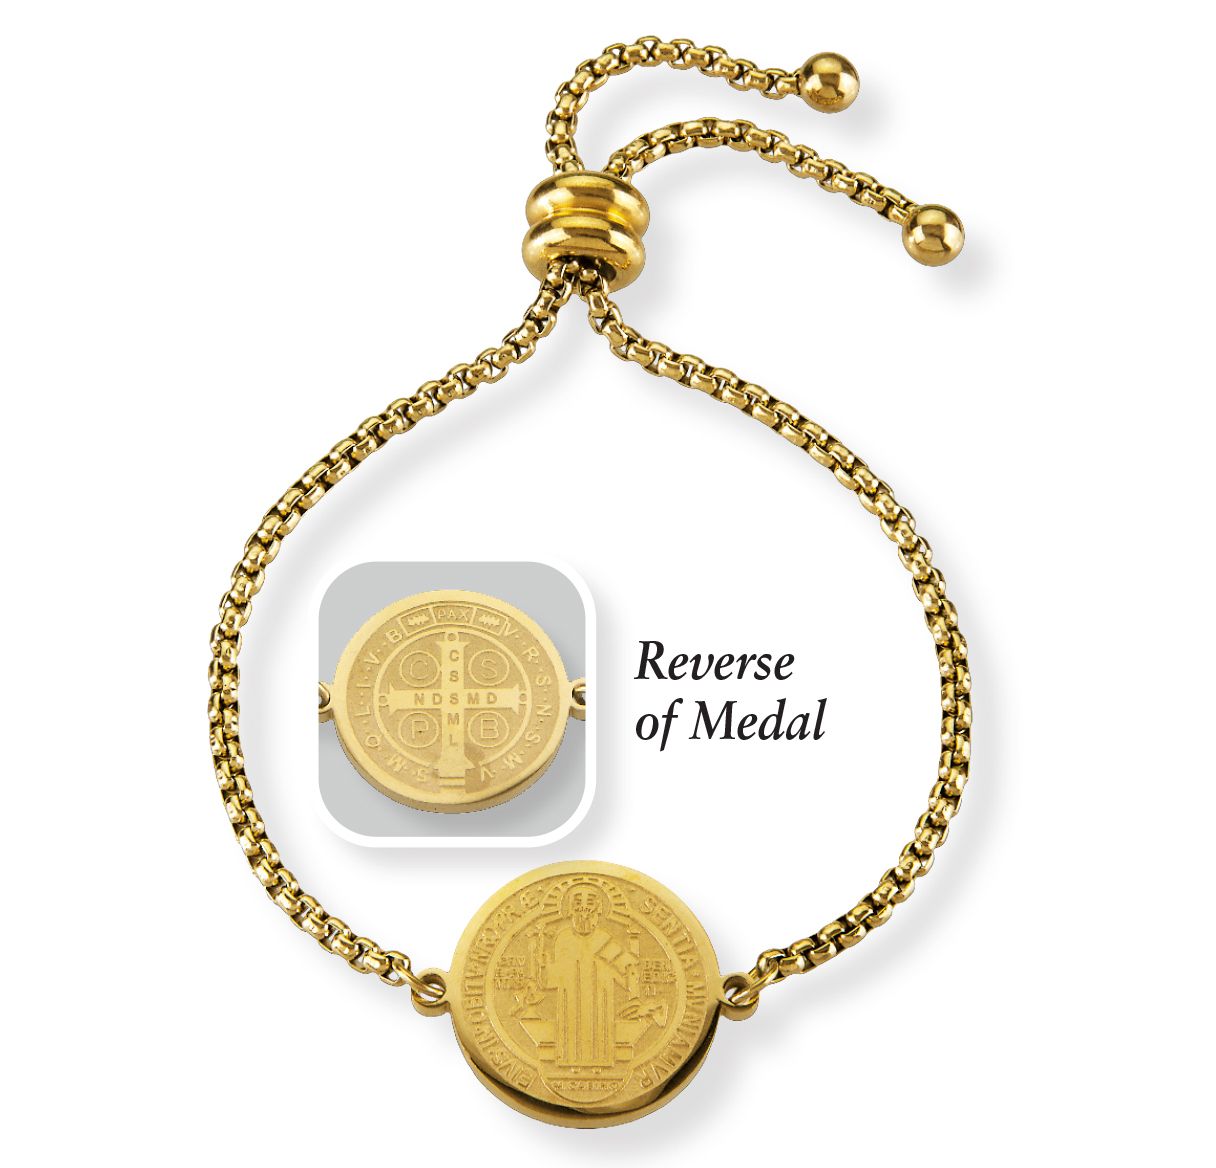 Saint Benedict Gold Anodized Stainless Steel Medal Bracelet.